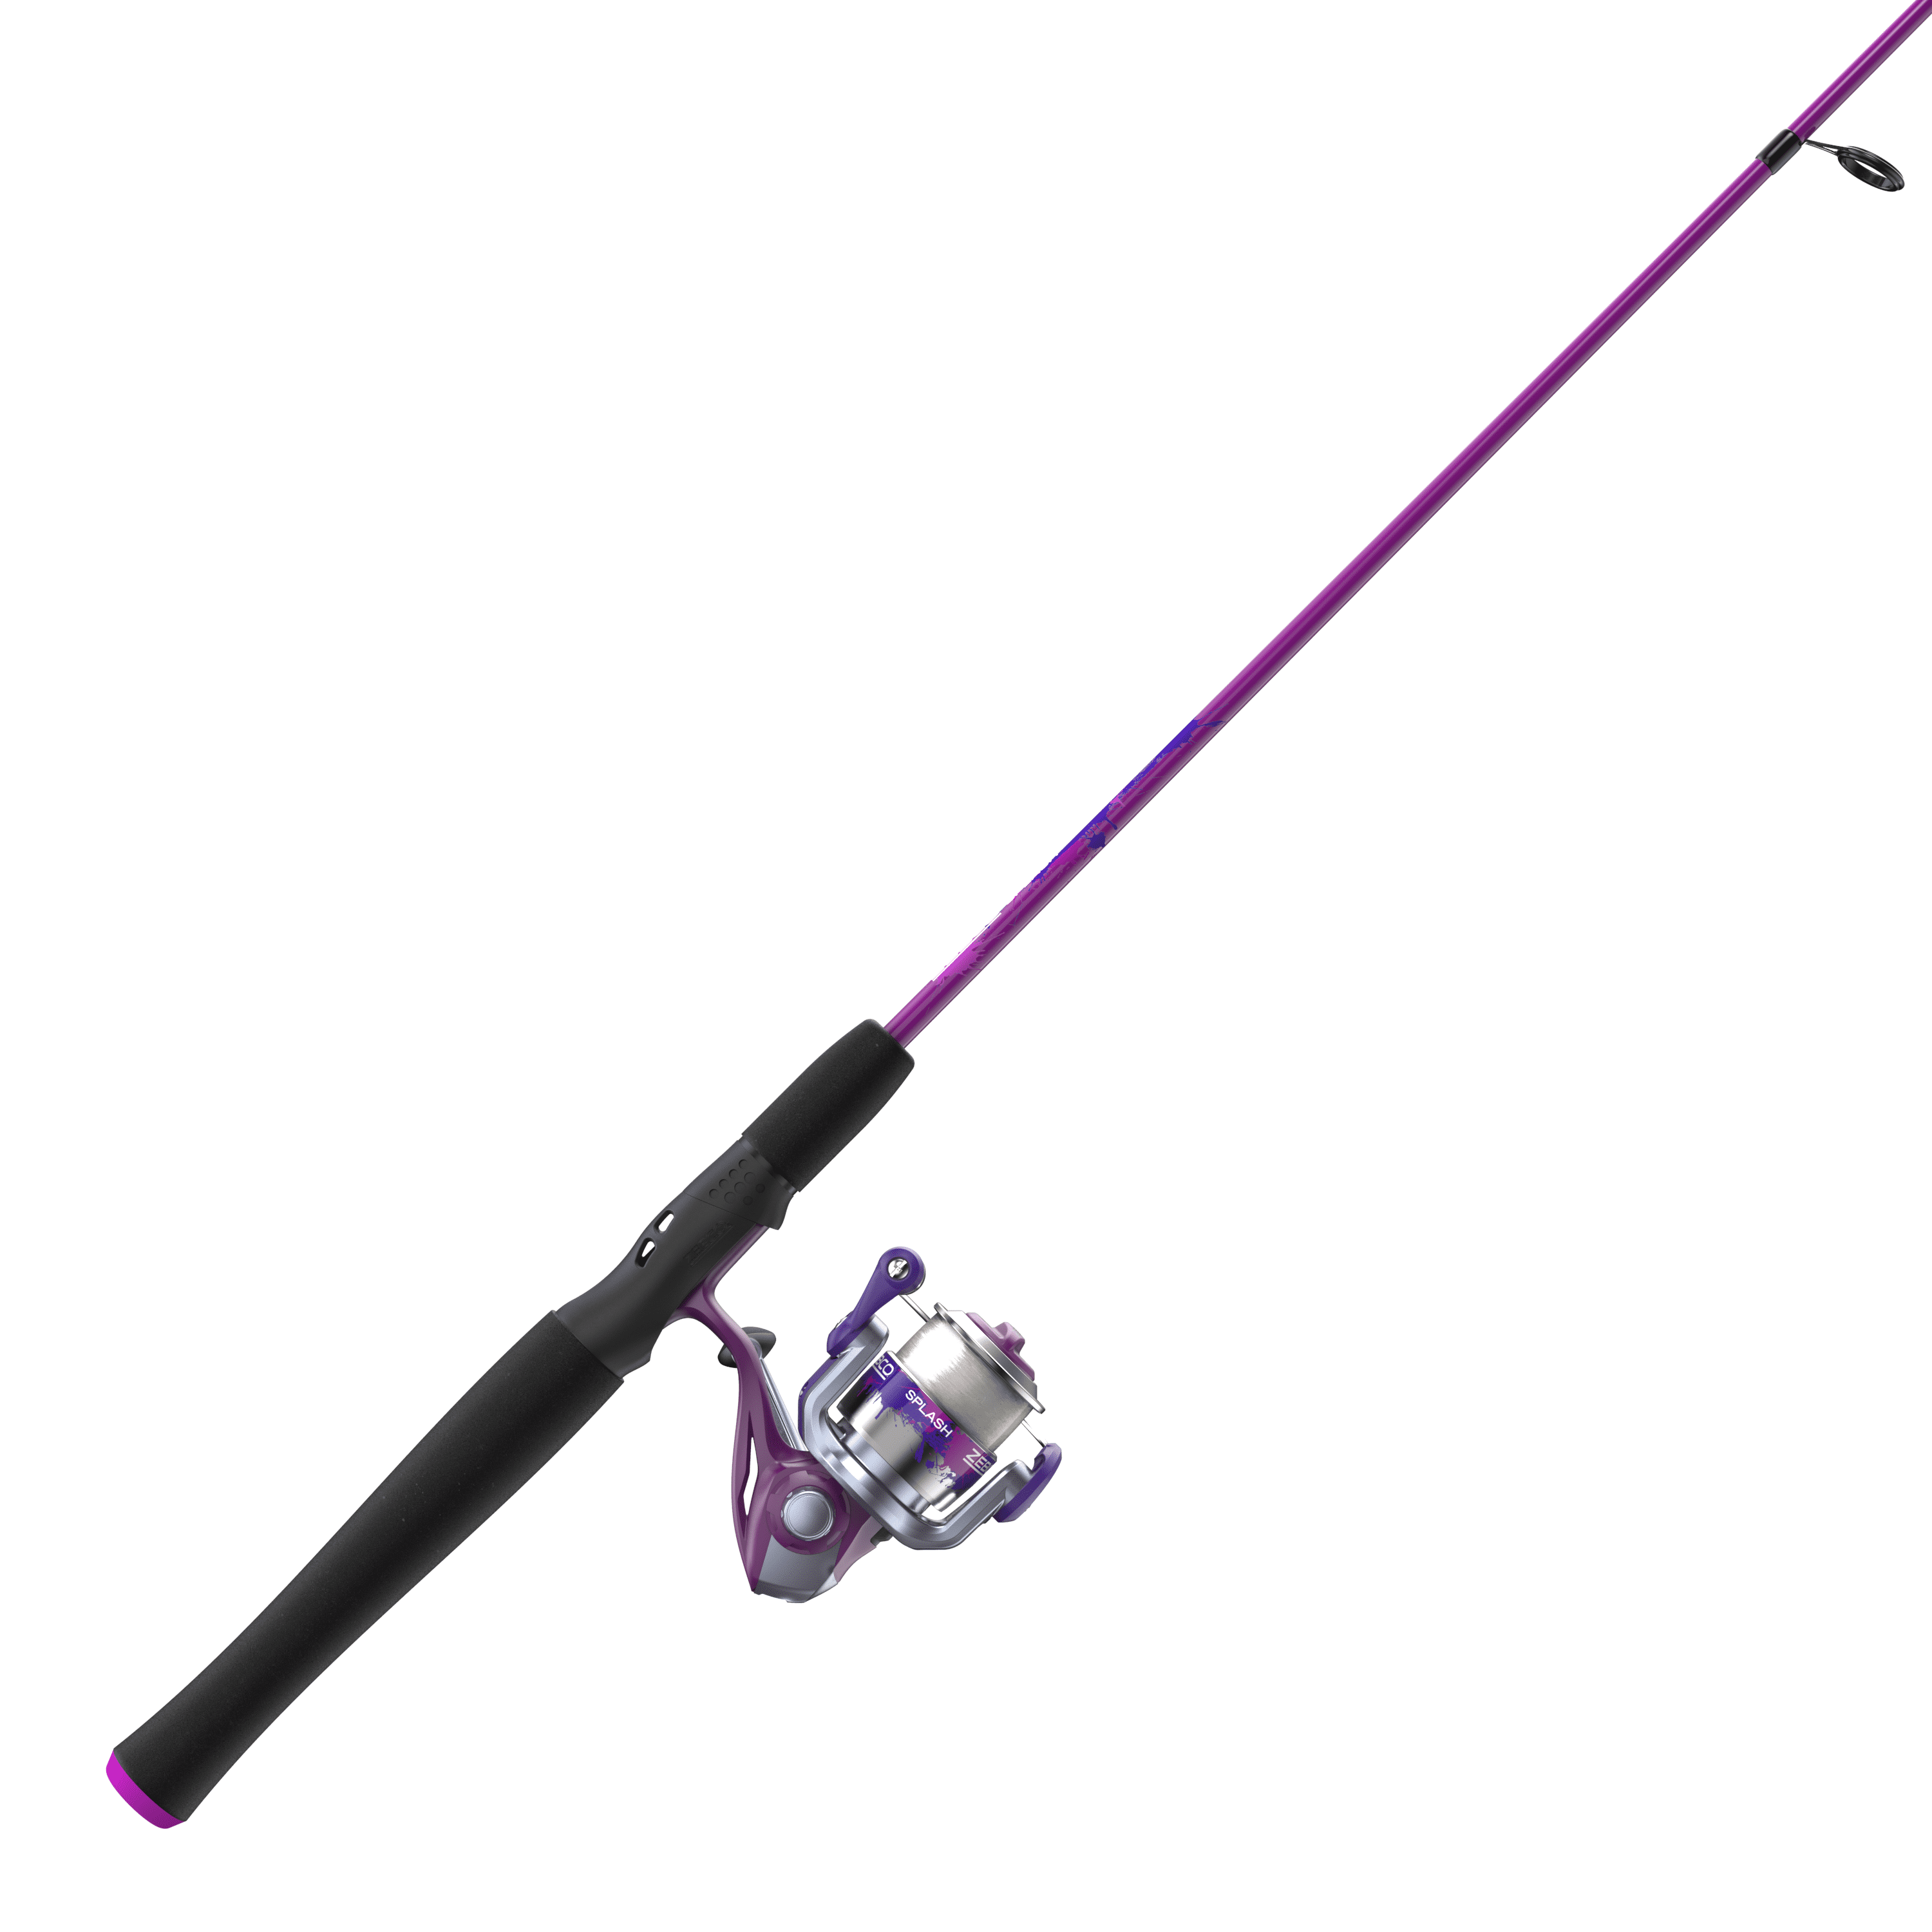 Pu 5-Foot 6-in 2-Piece Rod Zebco Slingshot Spincast Reel and Fishing Rod Combo 